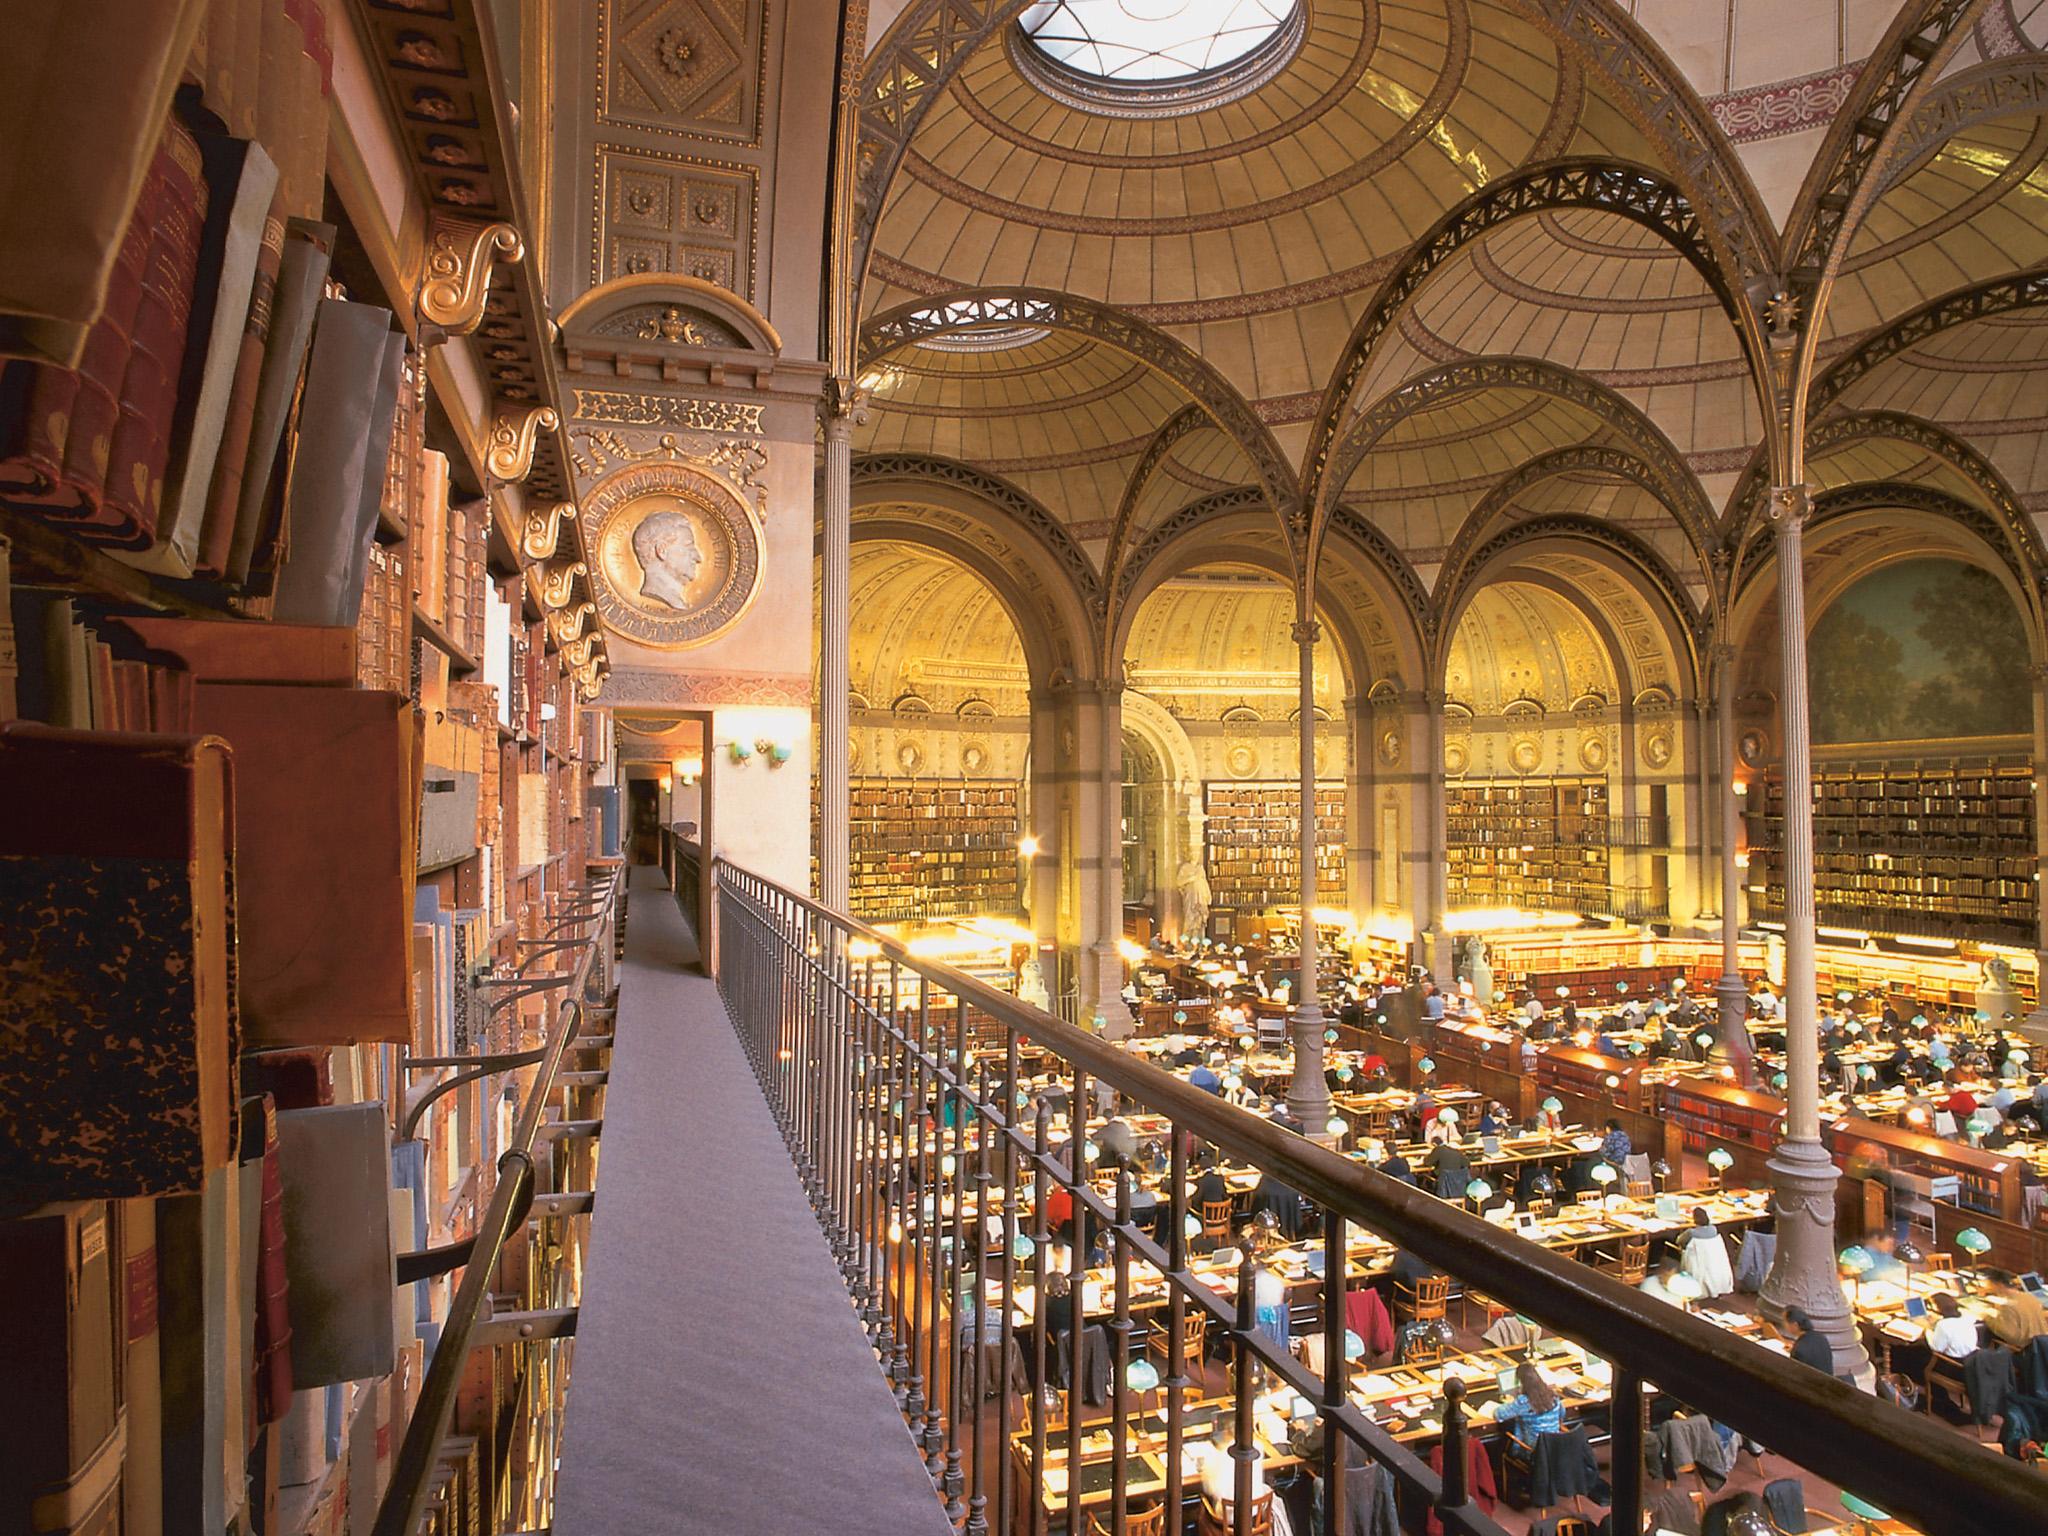 The reading hall of the National Library of France (Bibliotheque nationale de France) is a thing of beauty in Paris